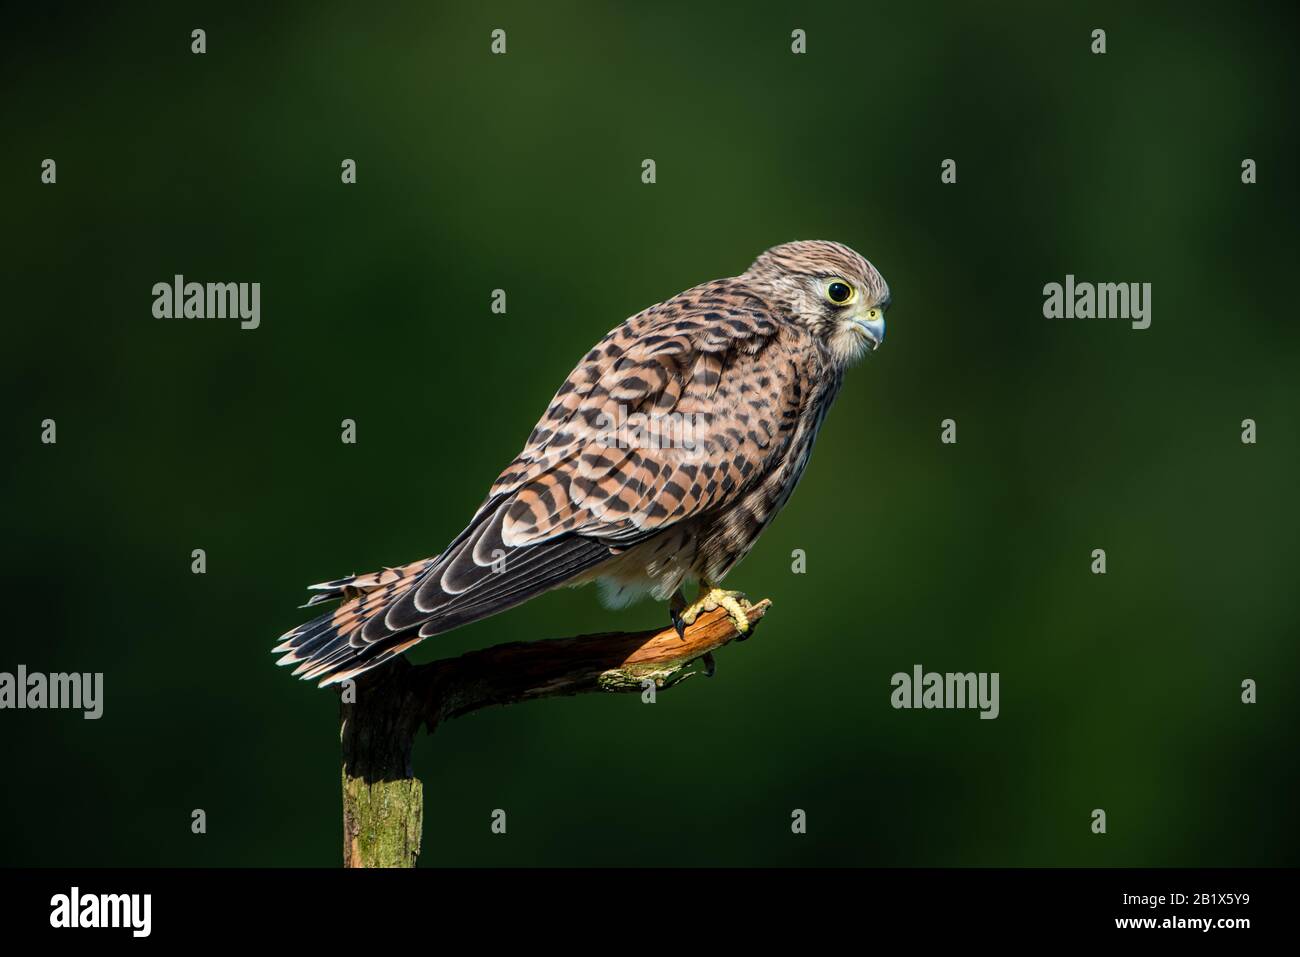 The hunting position in profile for the young kestrel (Falco tinnunculus) with a nice green defocused background Stock Photo